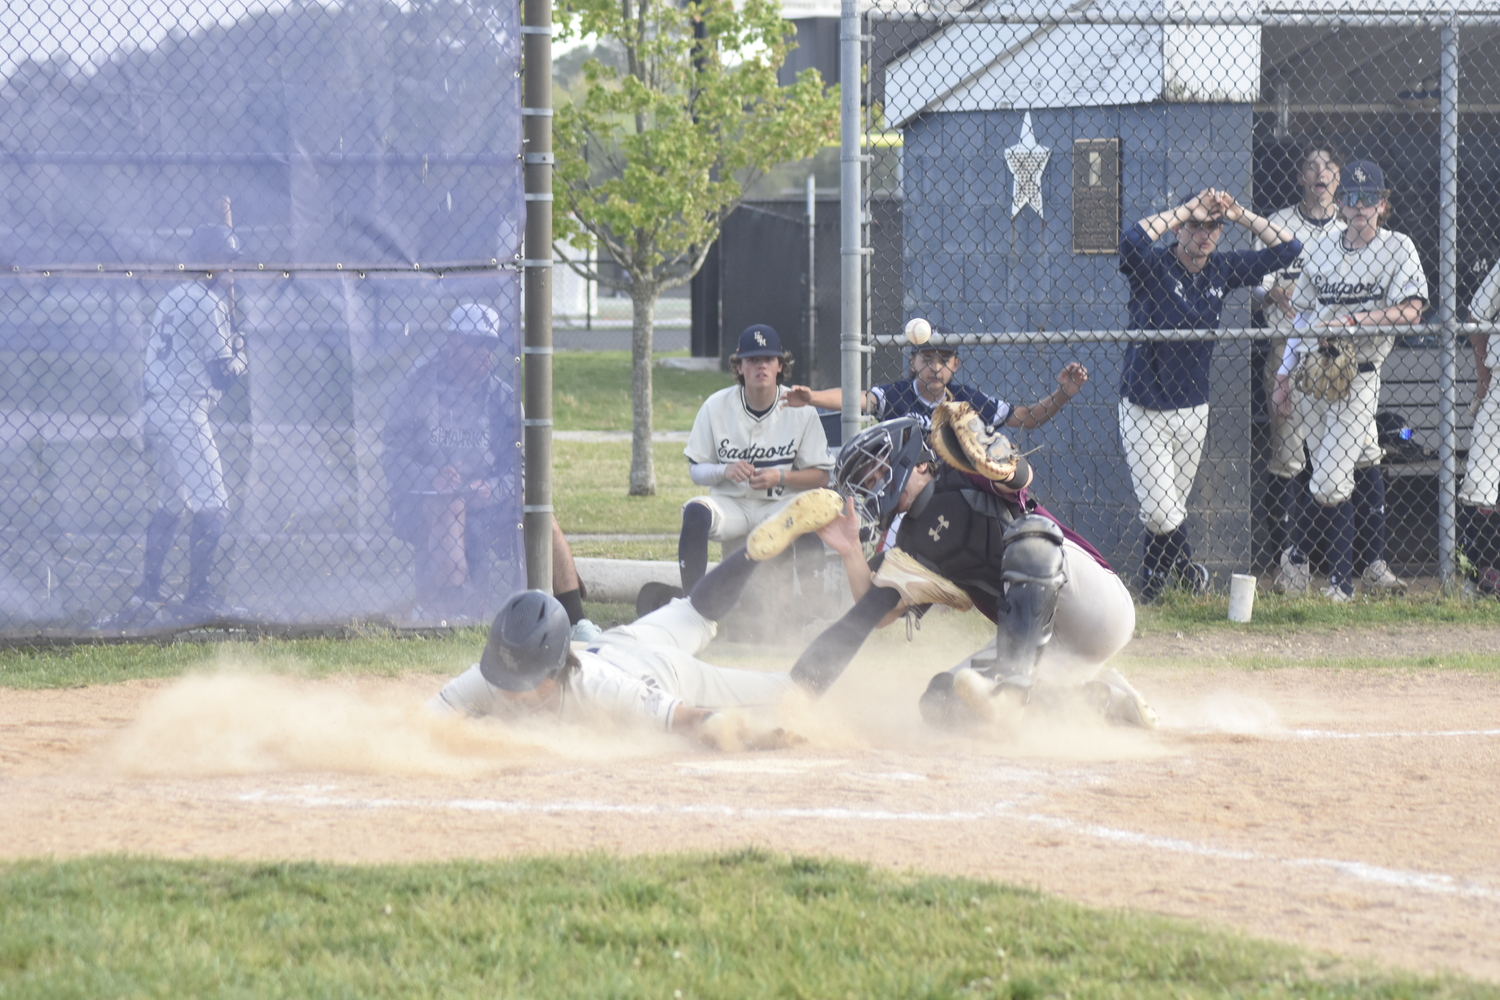 Bonac catcher Nico Horan-Puglia can't hold on to a throw to try and stop an ESM player from scoring.   DREW BUDD